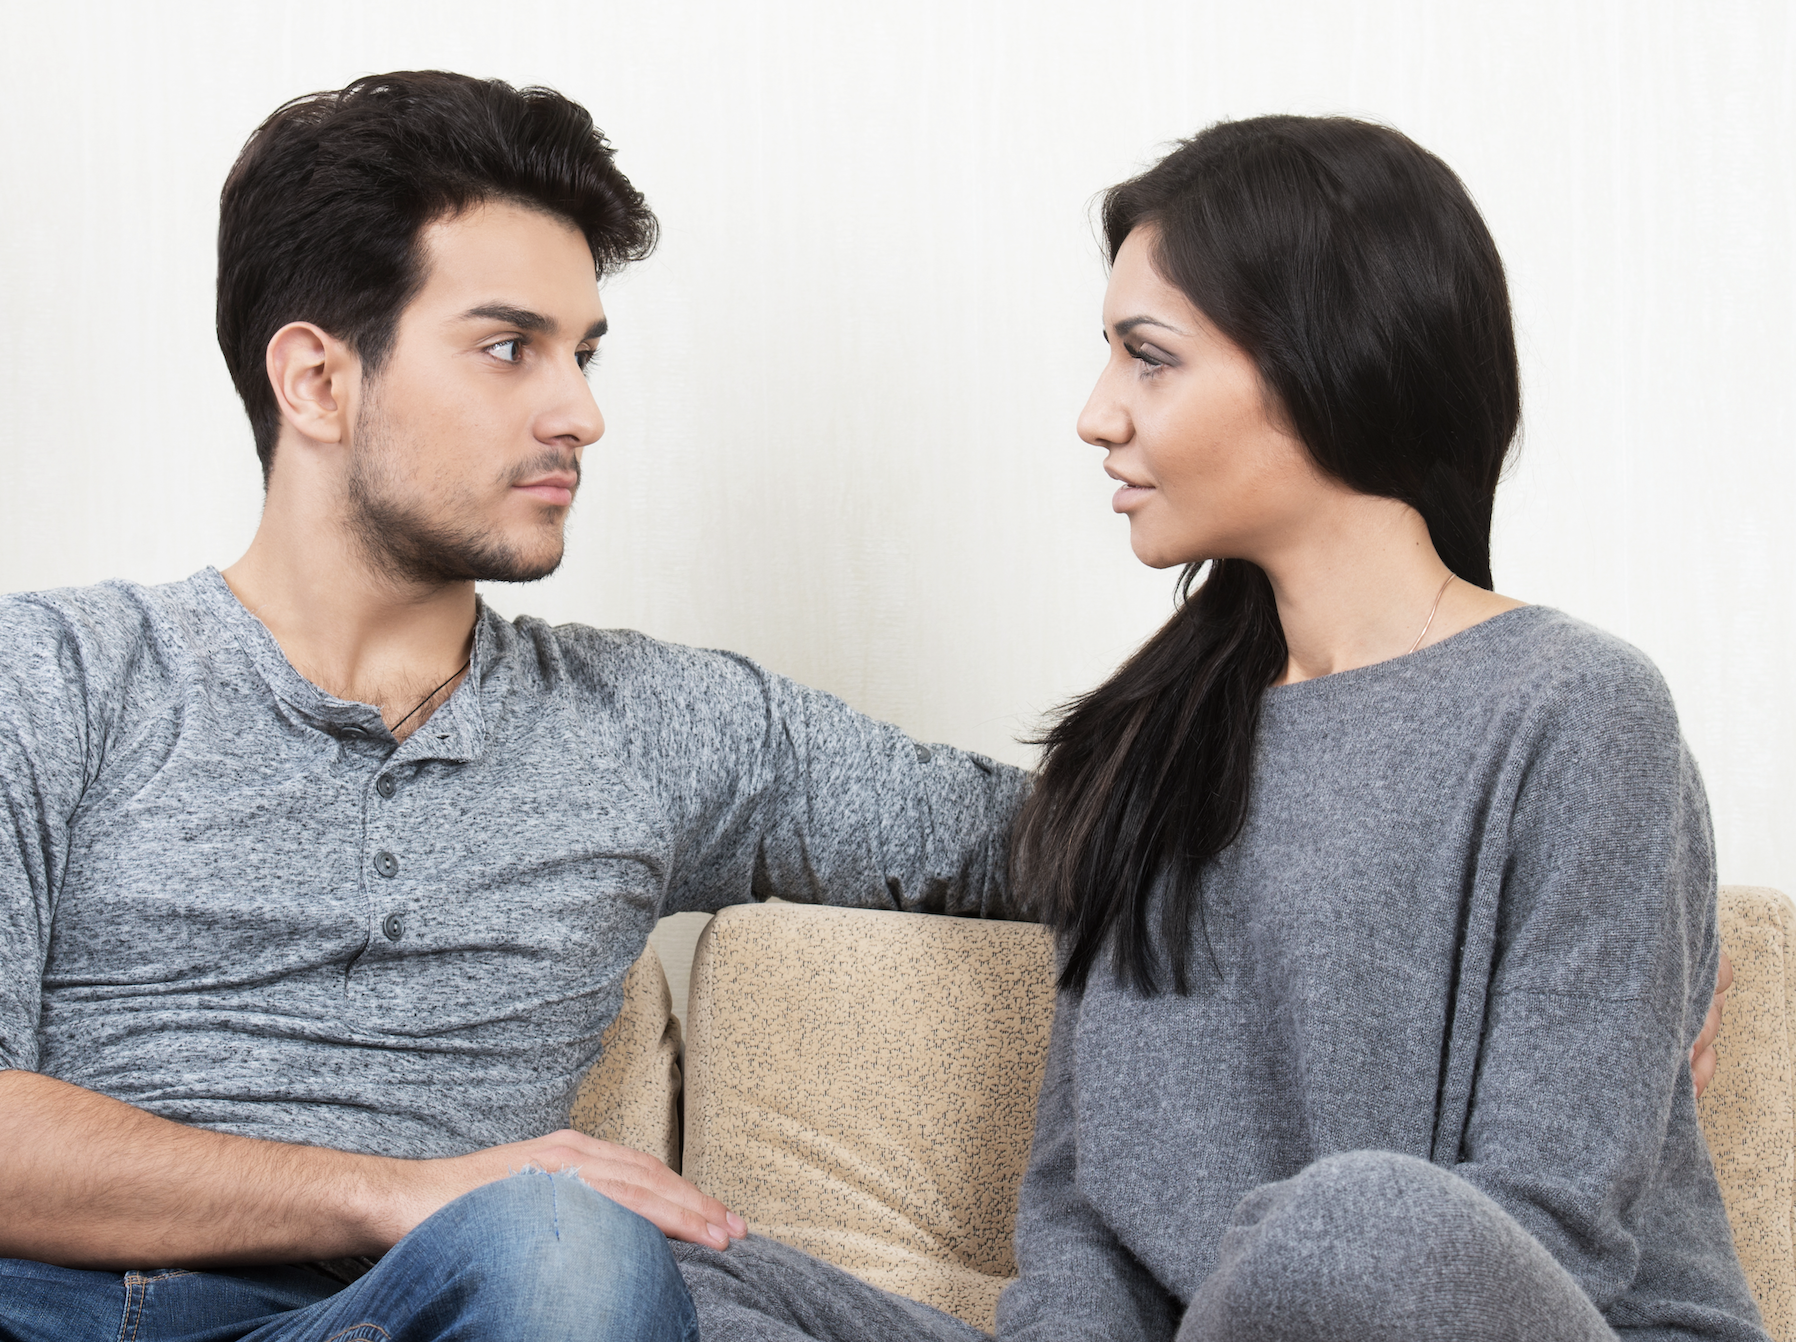 couple communicating on the couch supporting open relationship section